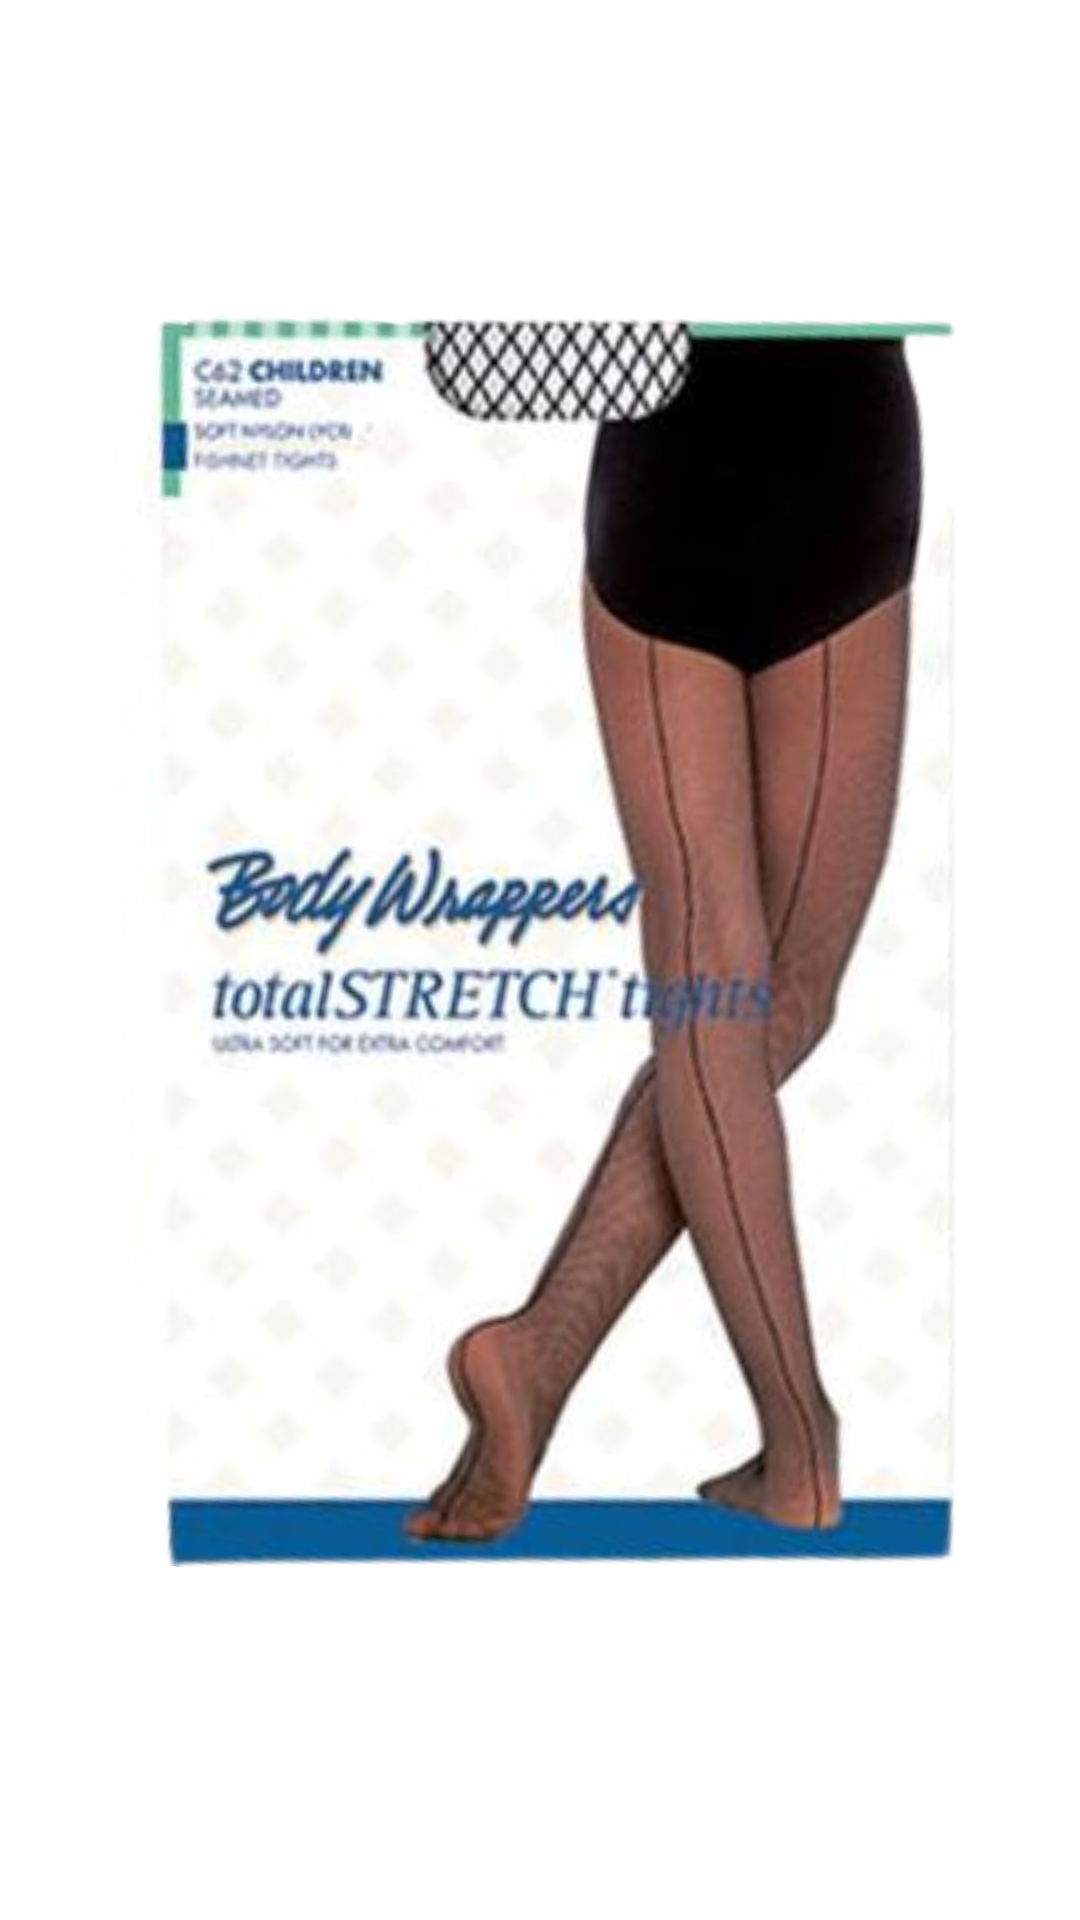 Womens totalSTRETCH Fishnet Seamed Tights - Fishnet Tights, Body Wrappers  A62